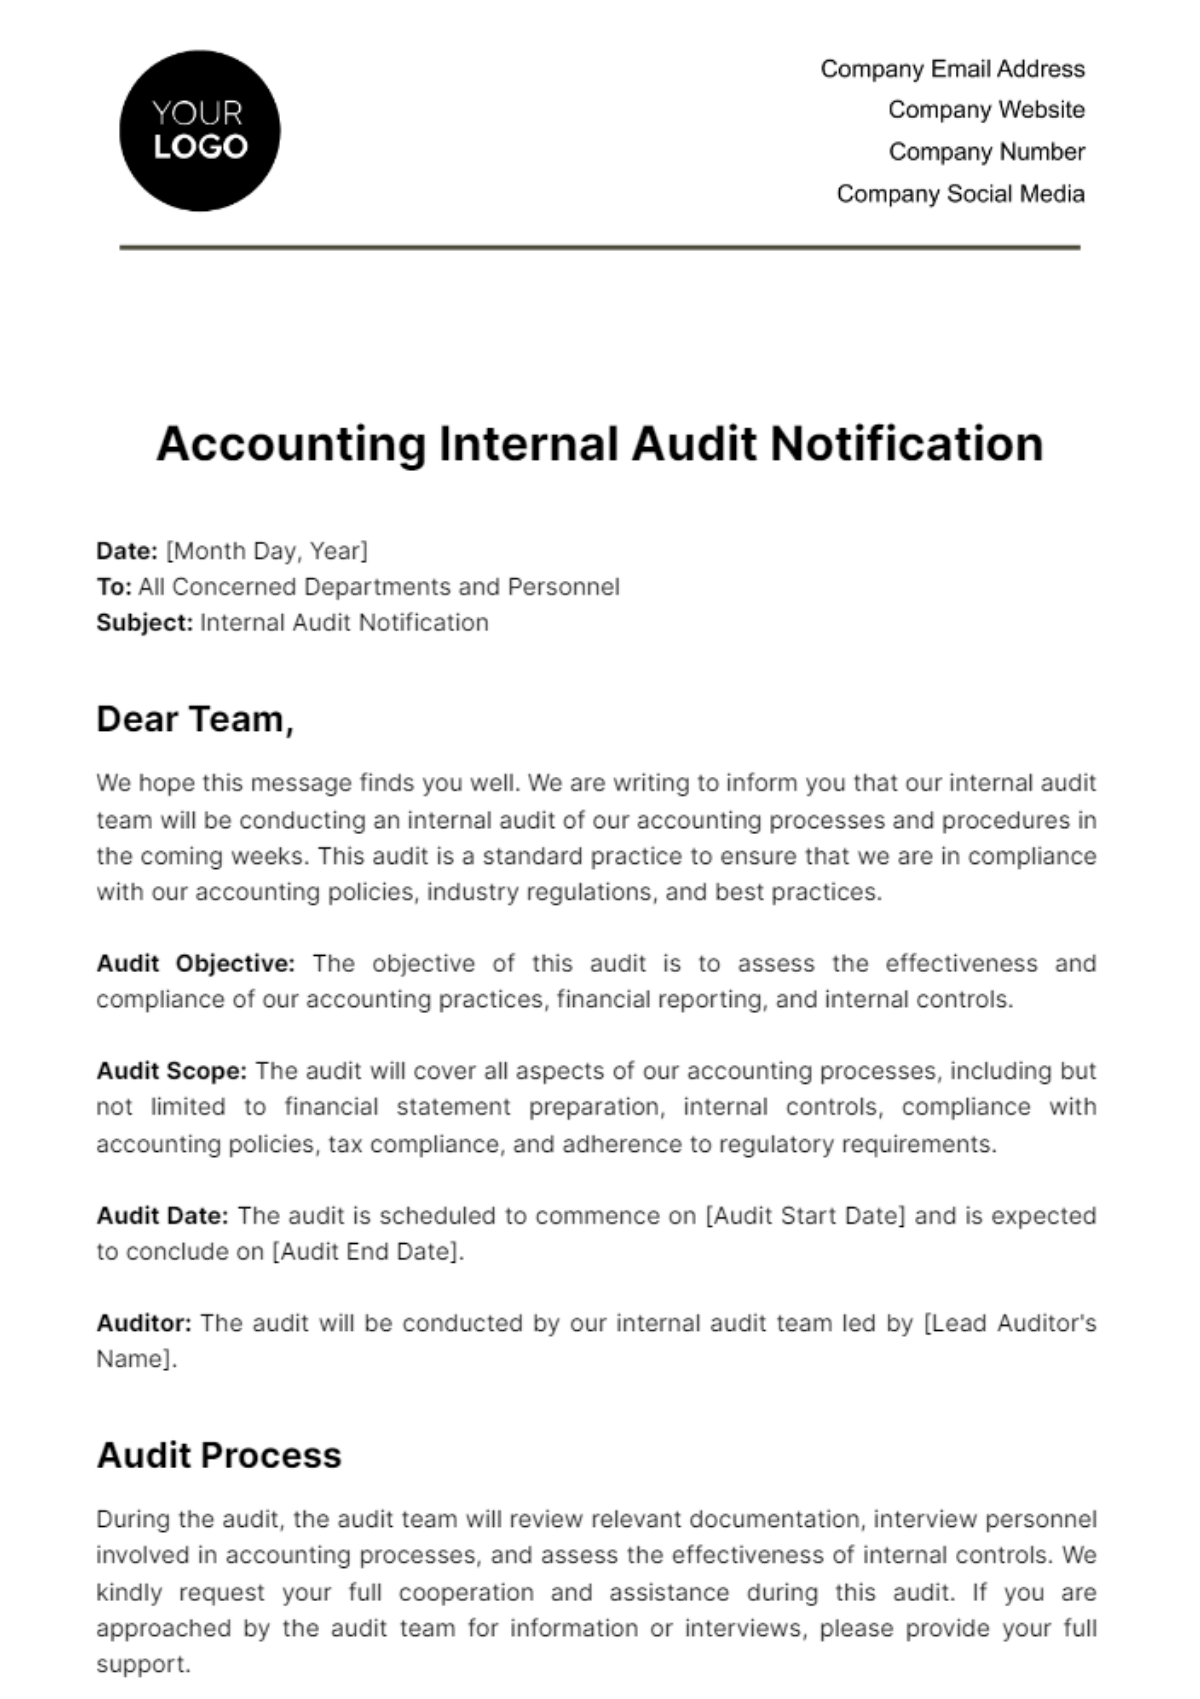 Free Accounting Internal Audit Notification Template